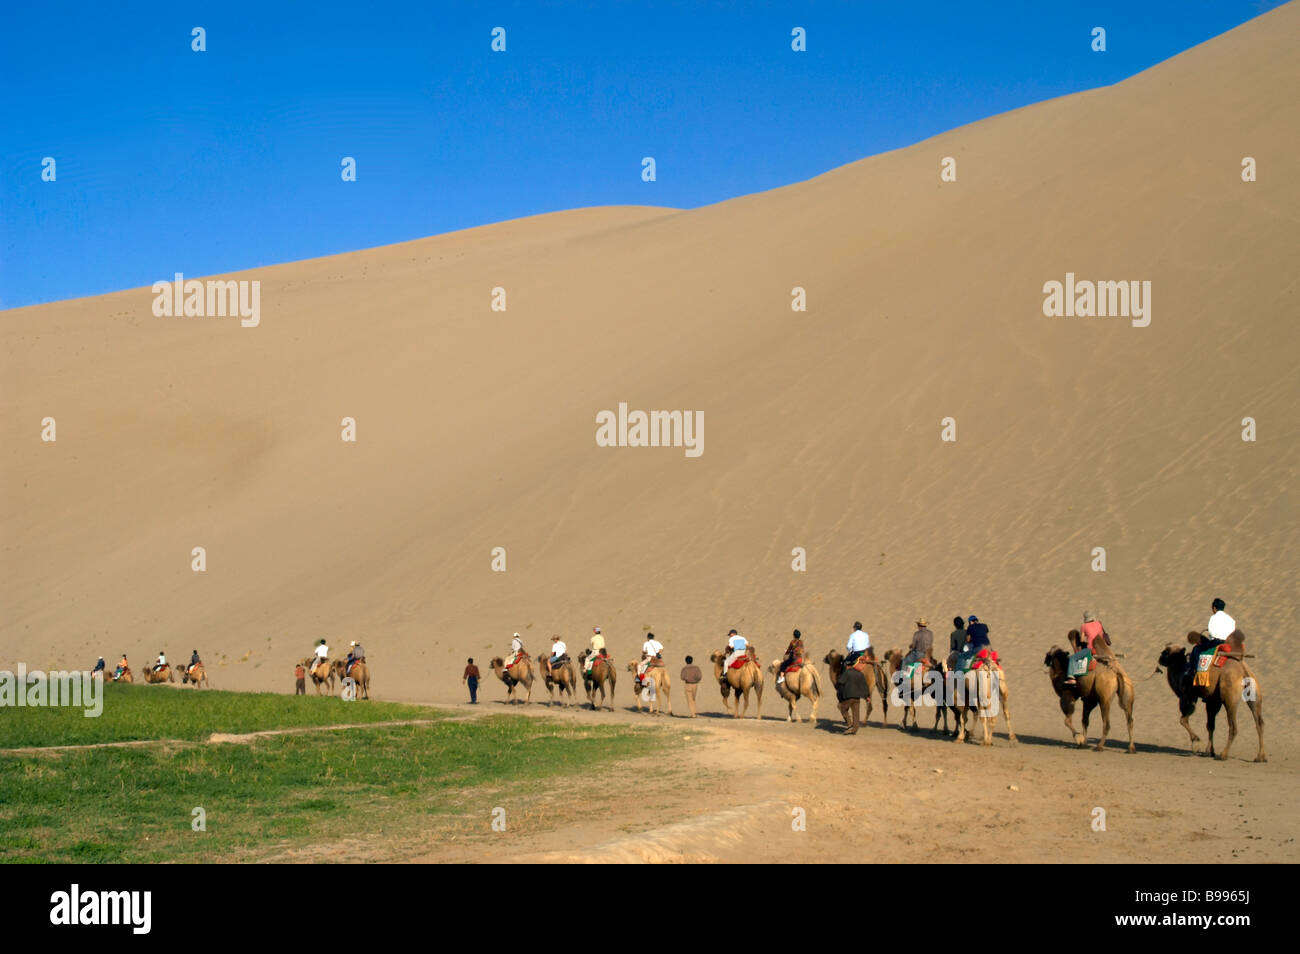 Dunhuang huge sand dune immense big Stock Photo